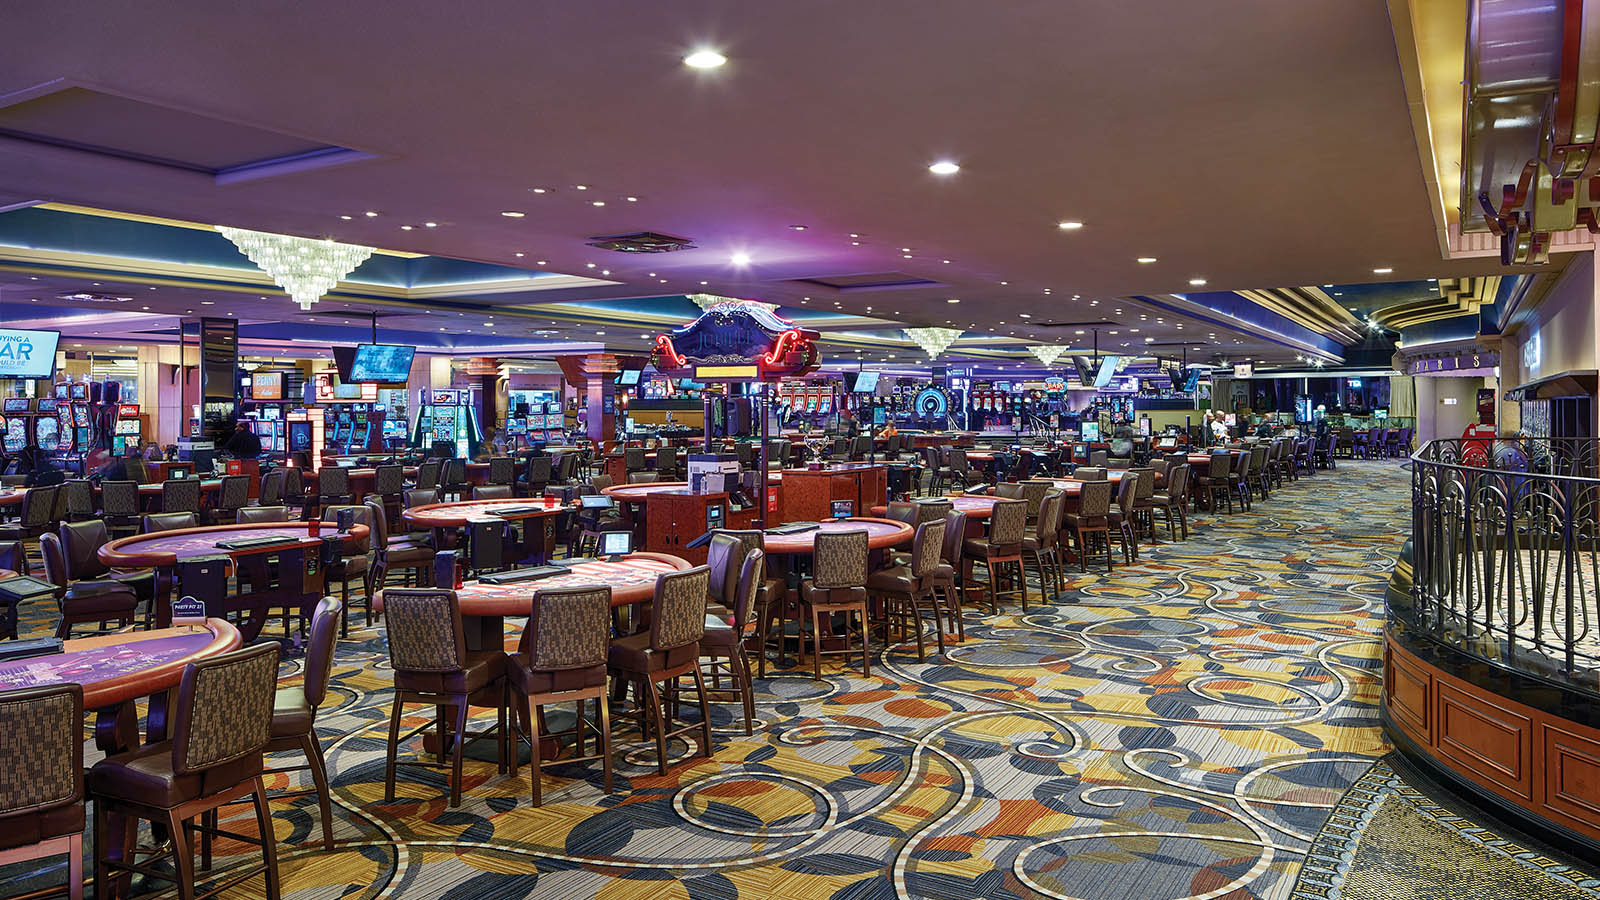 The Paris Casino in Harrah's Las Vegas. A long row of various gambling tables are in front of electronic gaming machines.